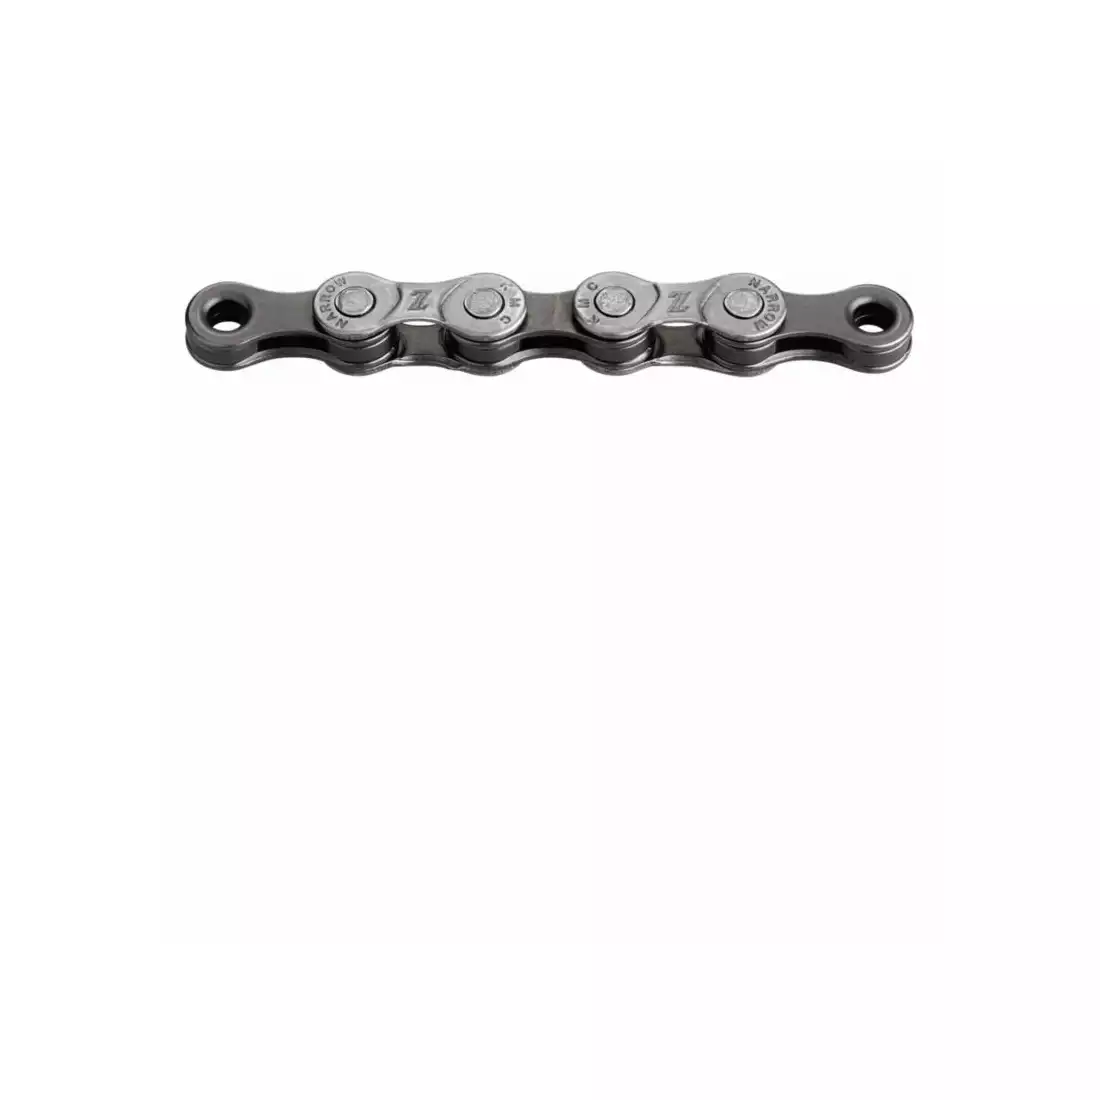 KMC HV700 Bicycle chain 7-8-speed, 116 links, gray brown